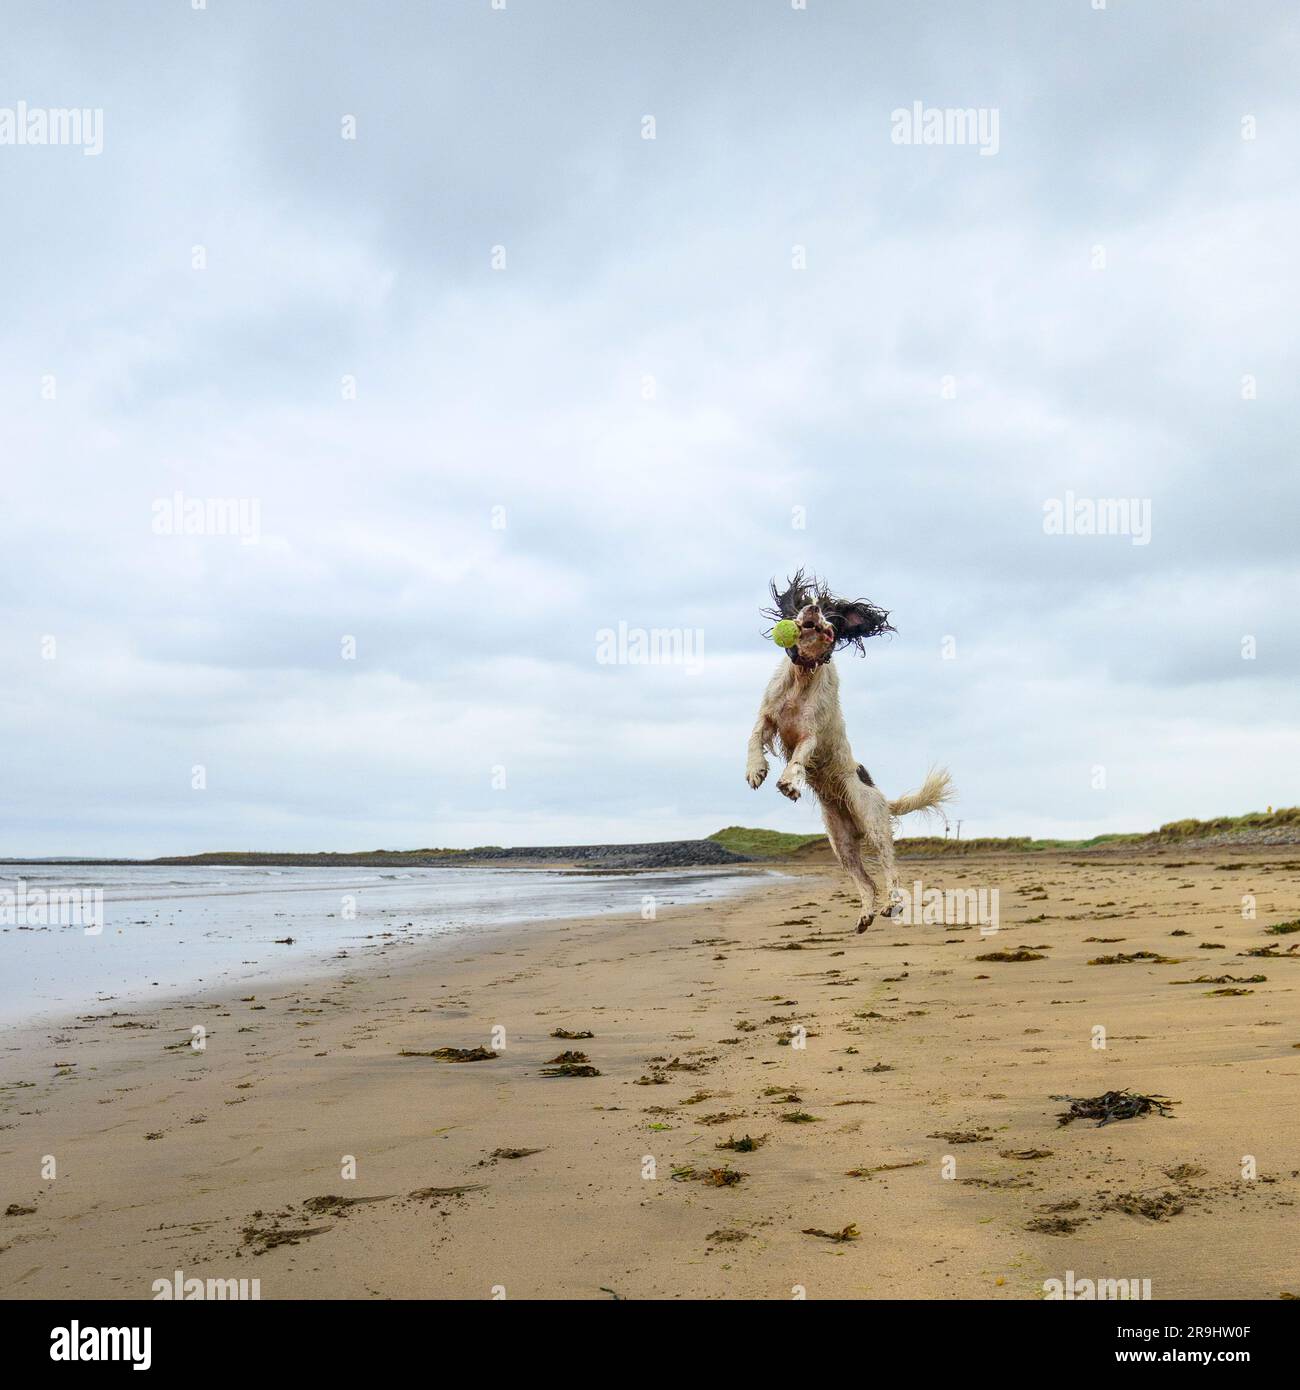 Springer Spaniel dog jumping for and catching a ball on a beach Stock Photo